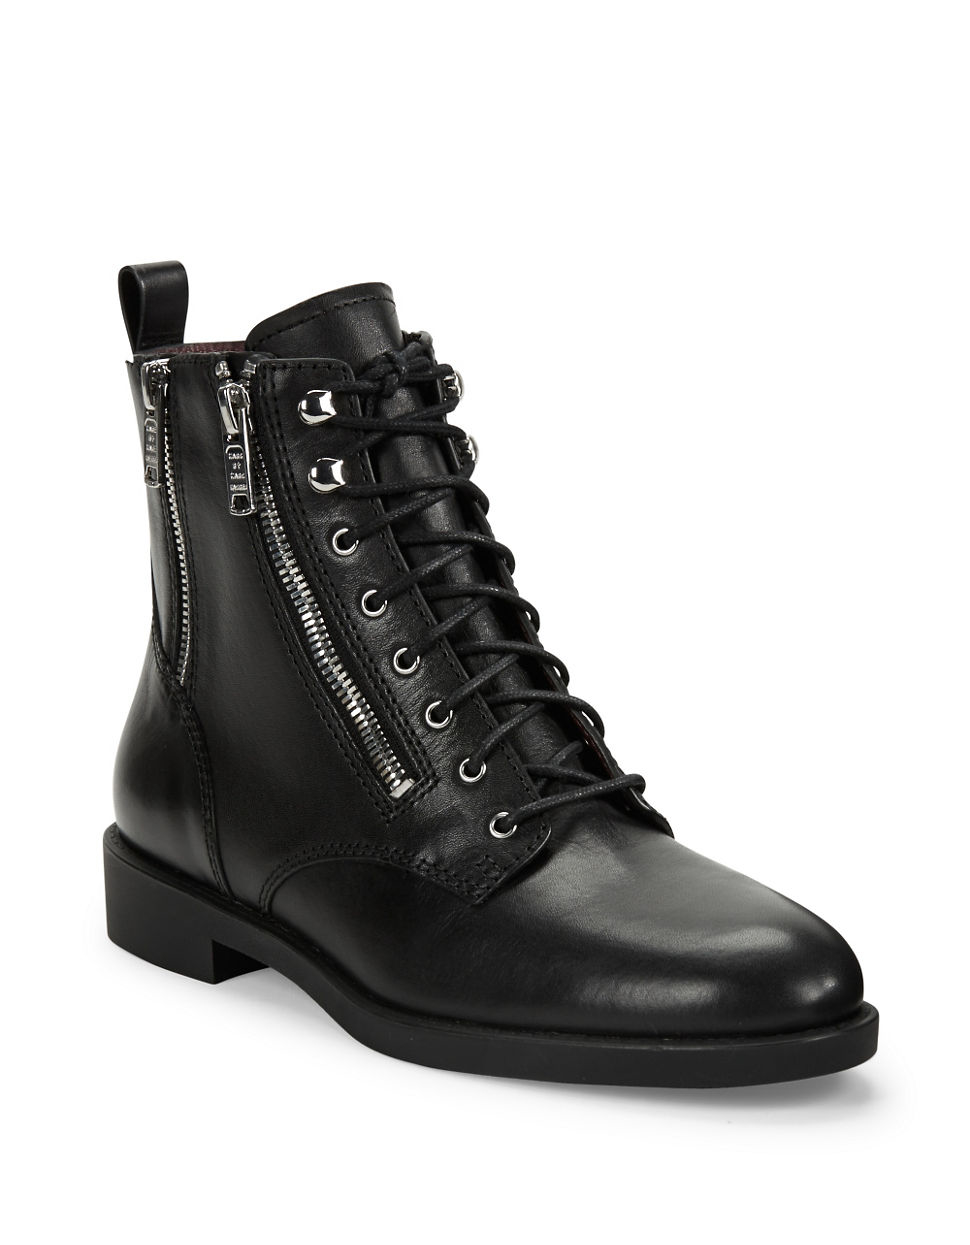 Marc by marc jacobs Montague Leather Lace-up Ankle Boots in Black | Lyst